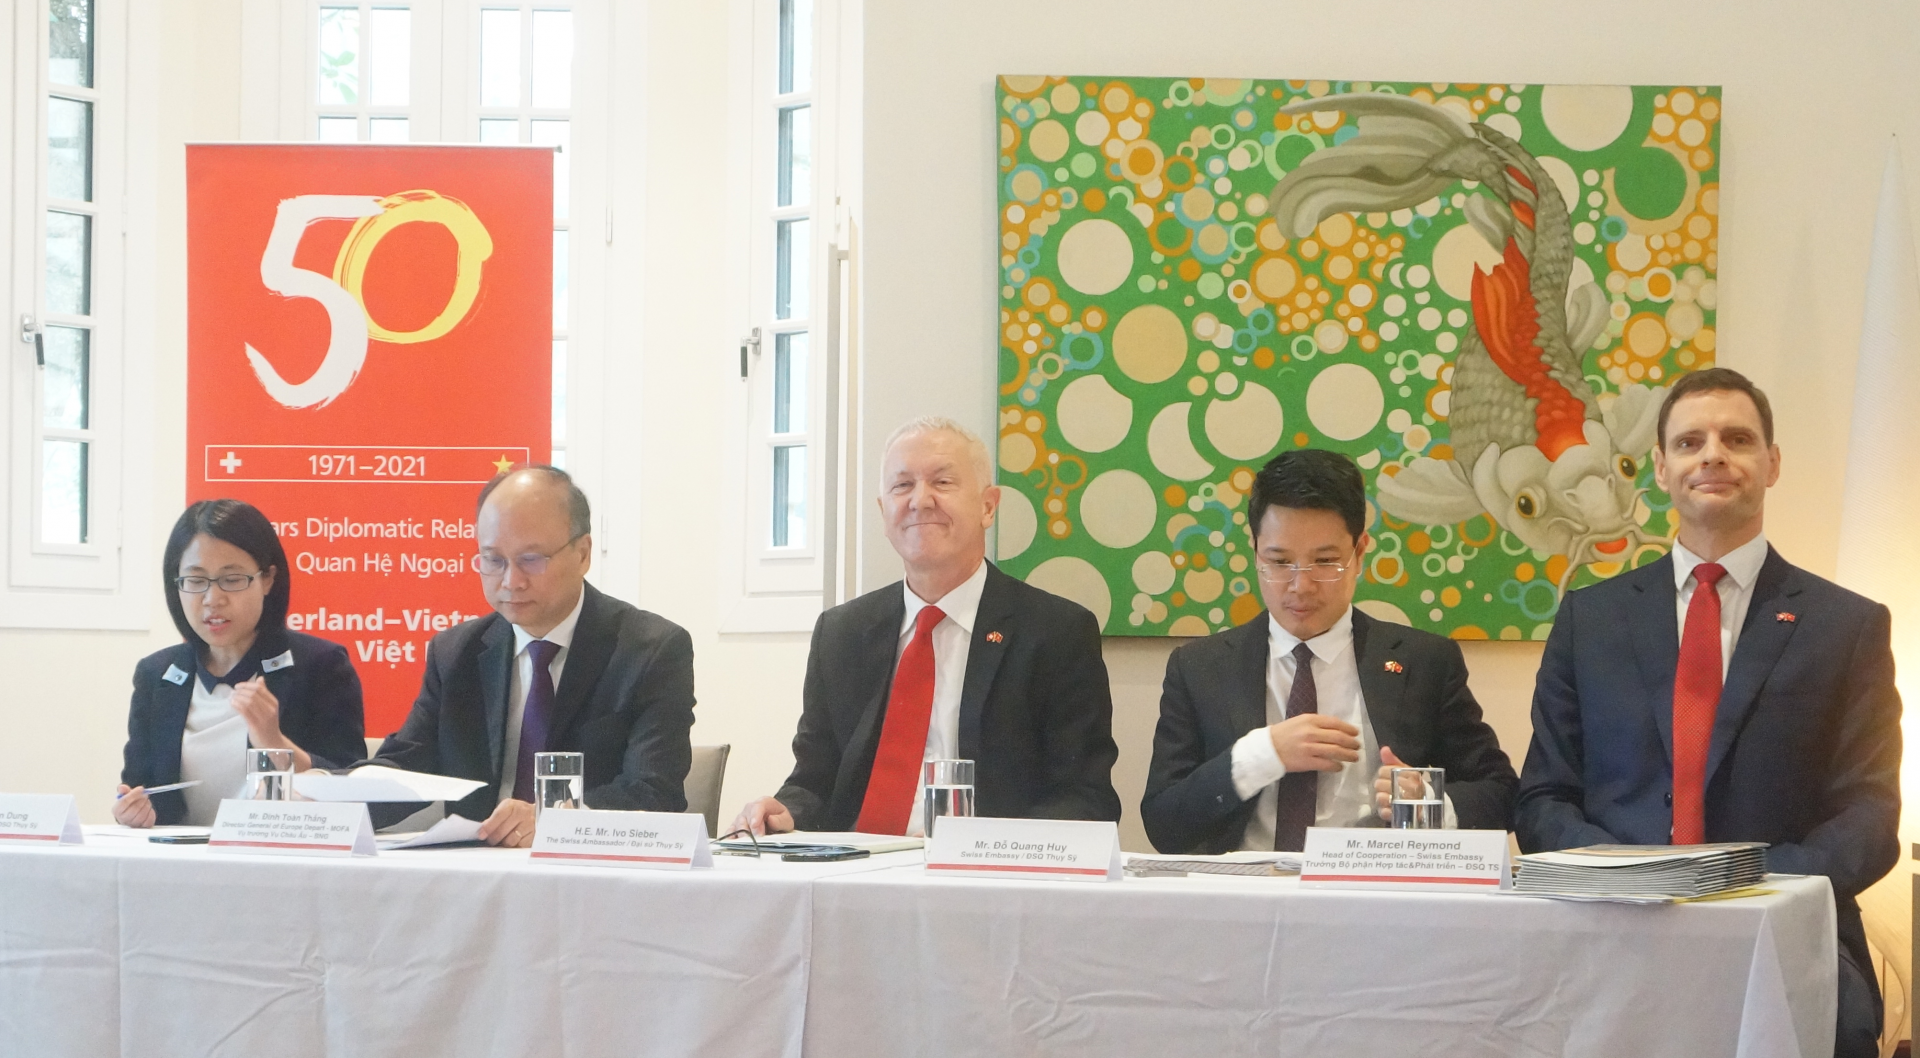 commemorations to celebrate the 50th anniversary of swiss vietnamese diplomatic relations in 2021 launched